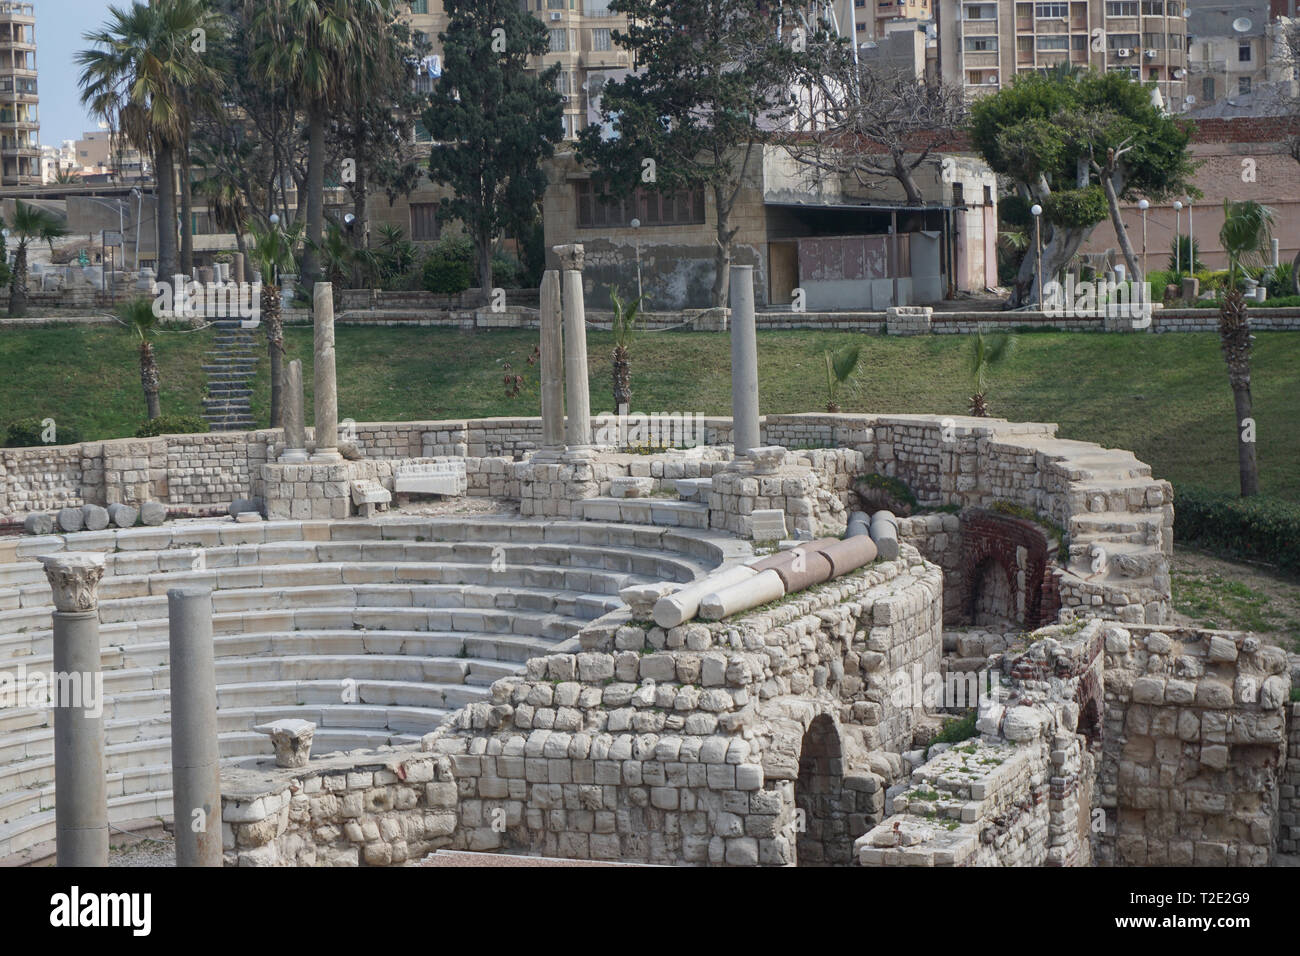 Alexandria, Egypt: The Roman Theater at Kom el-Dikka, a Polish-Egyptian archaeological project that has uncovered an ancient city center. Stock Photo